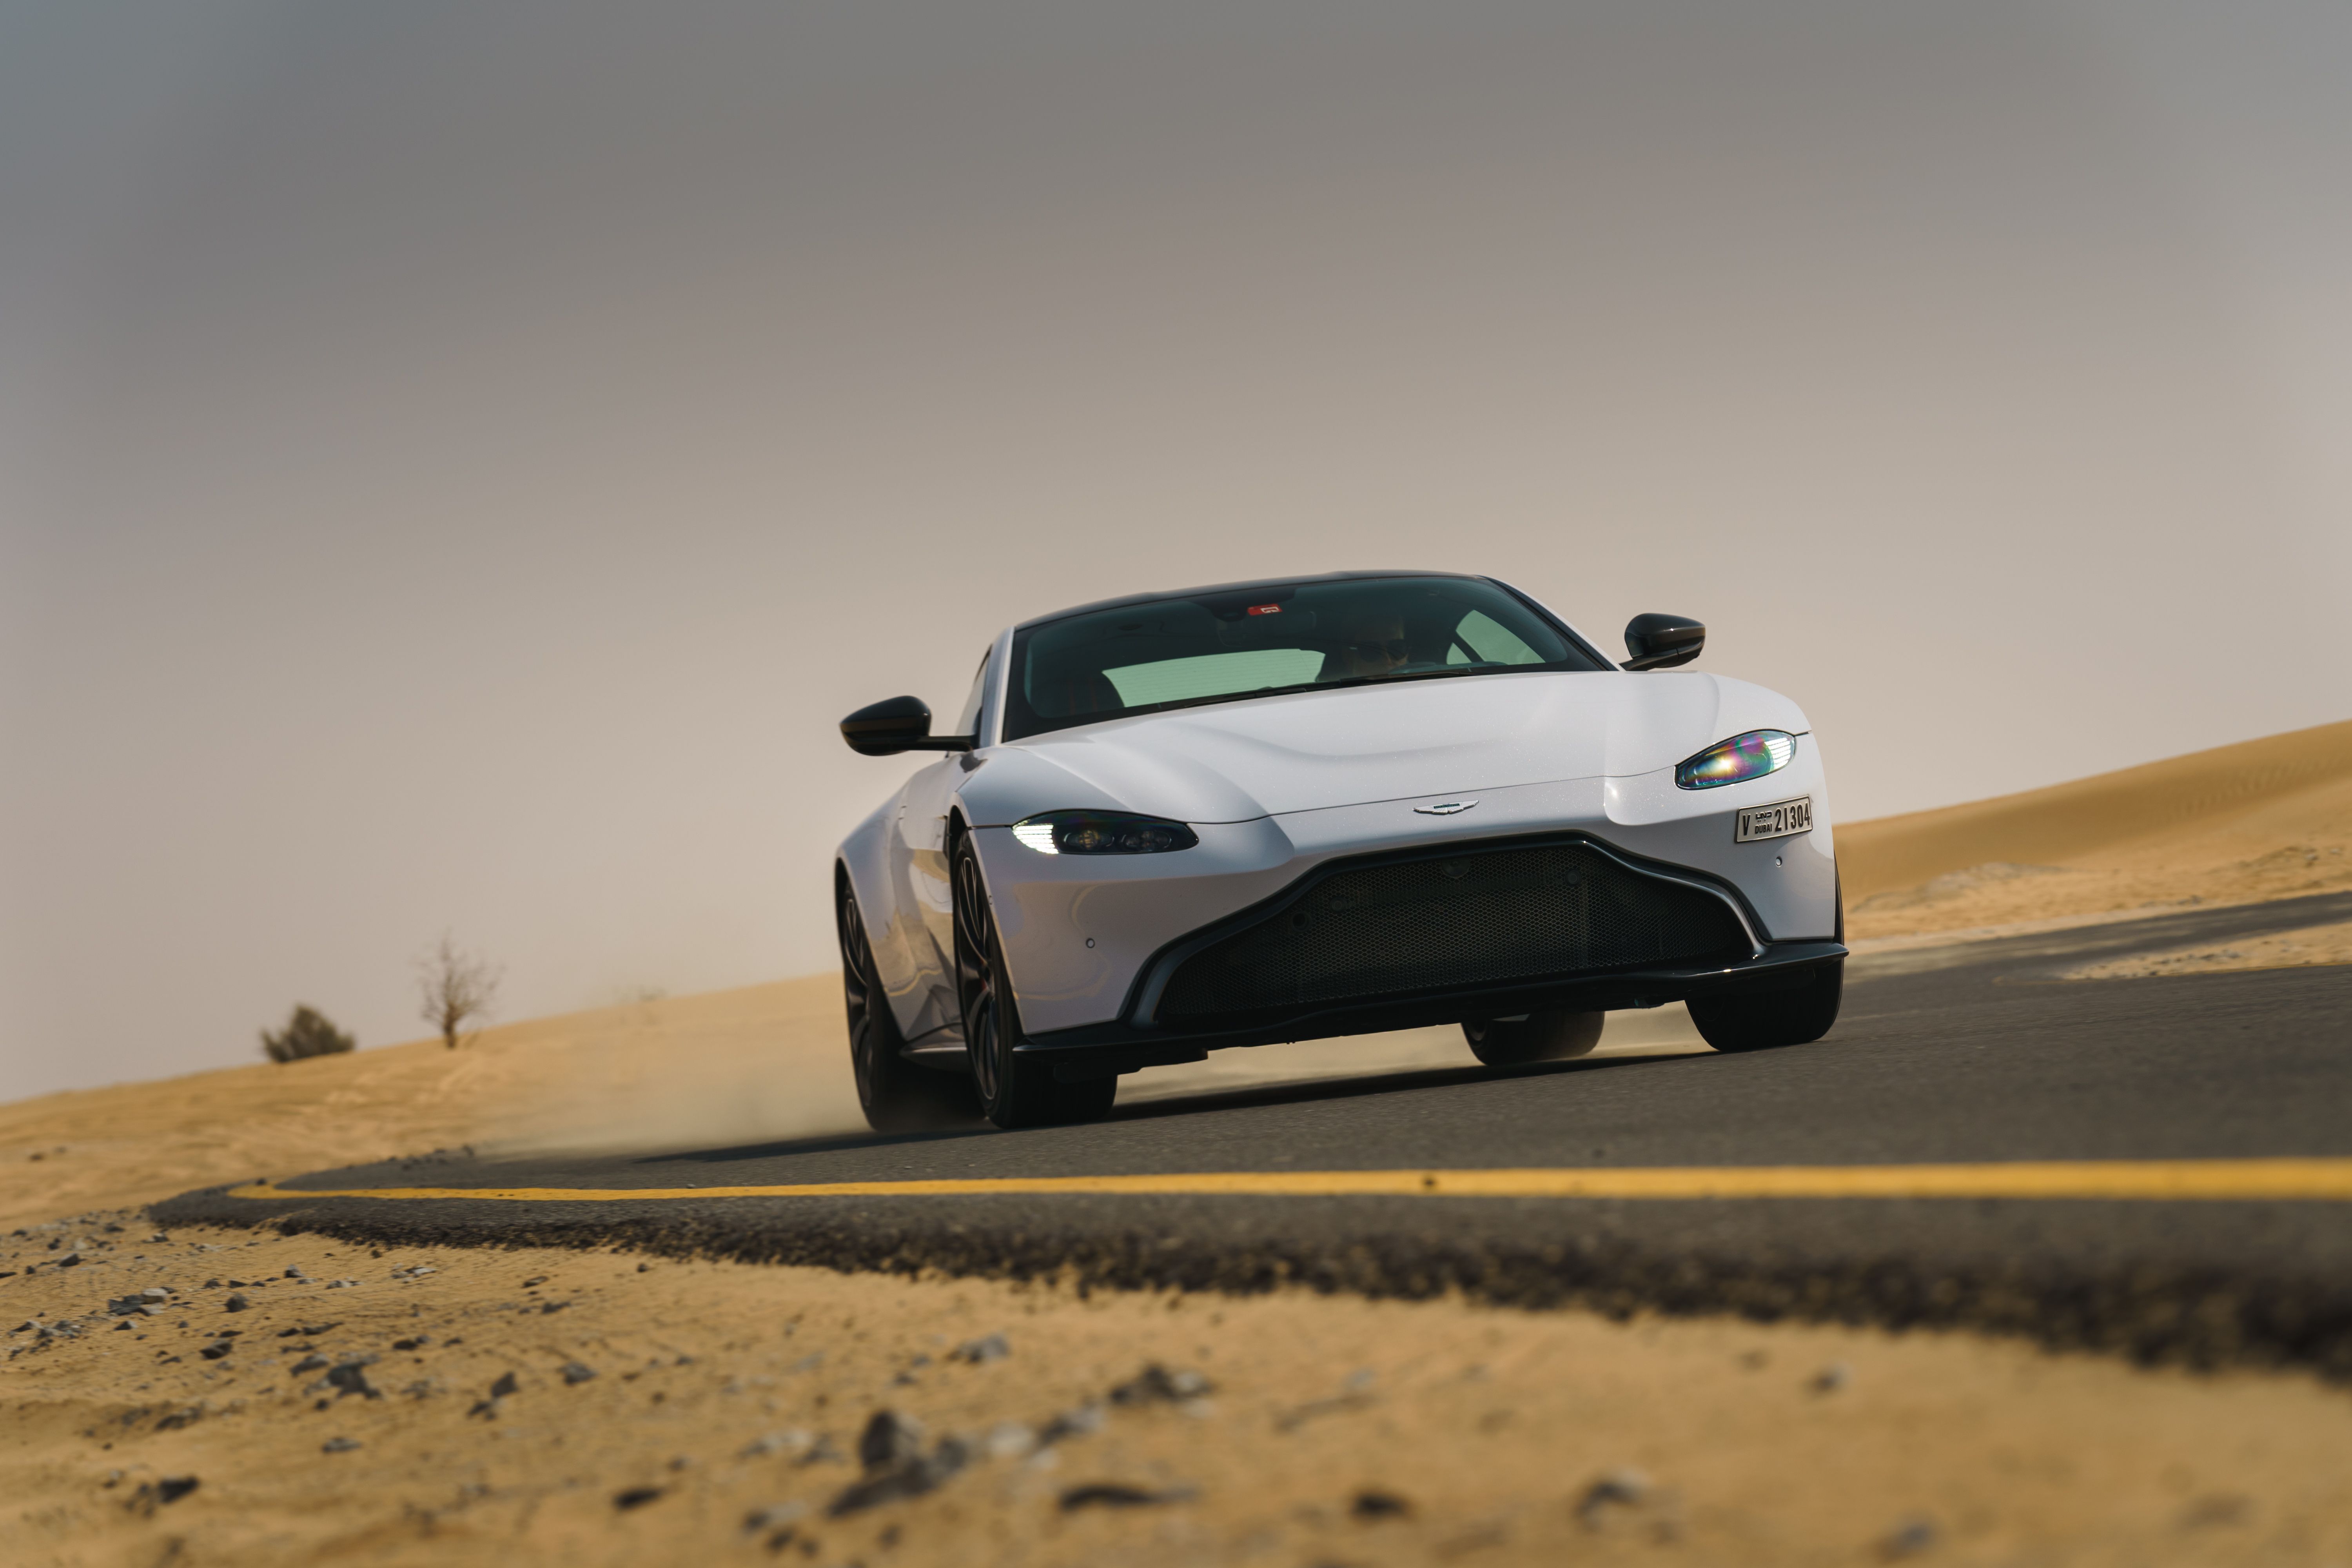 The front of the Aston Martin Vantage Coupe in white